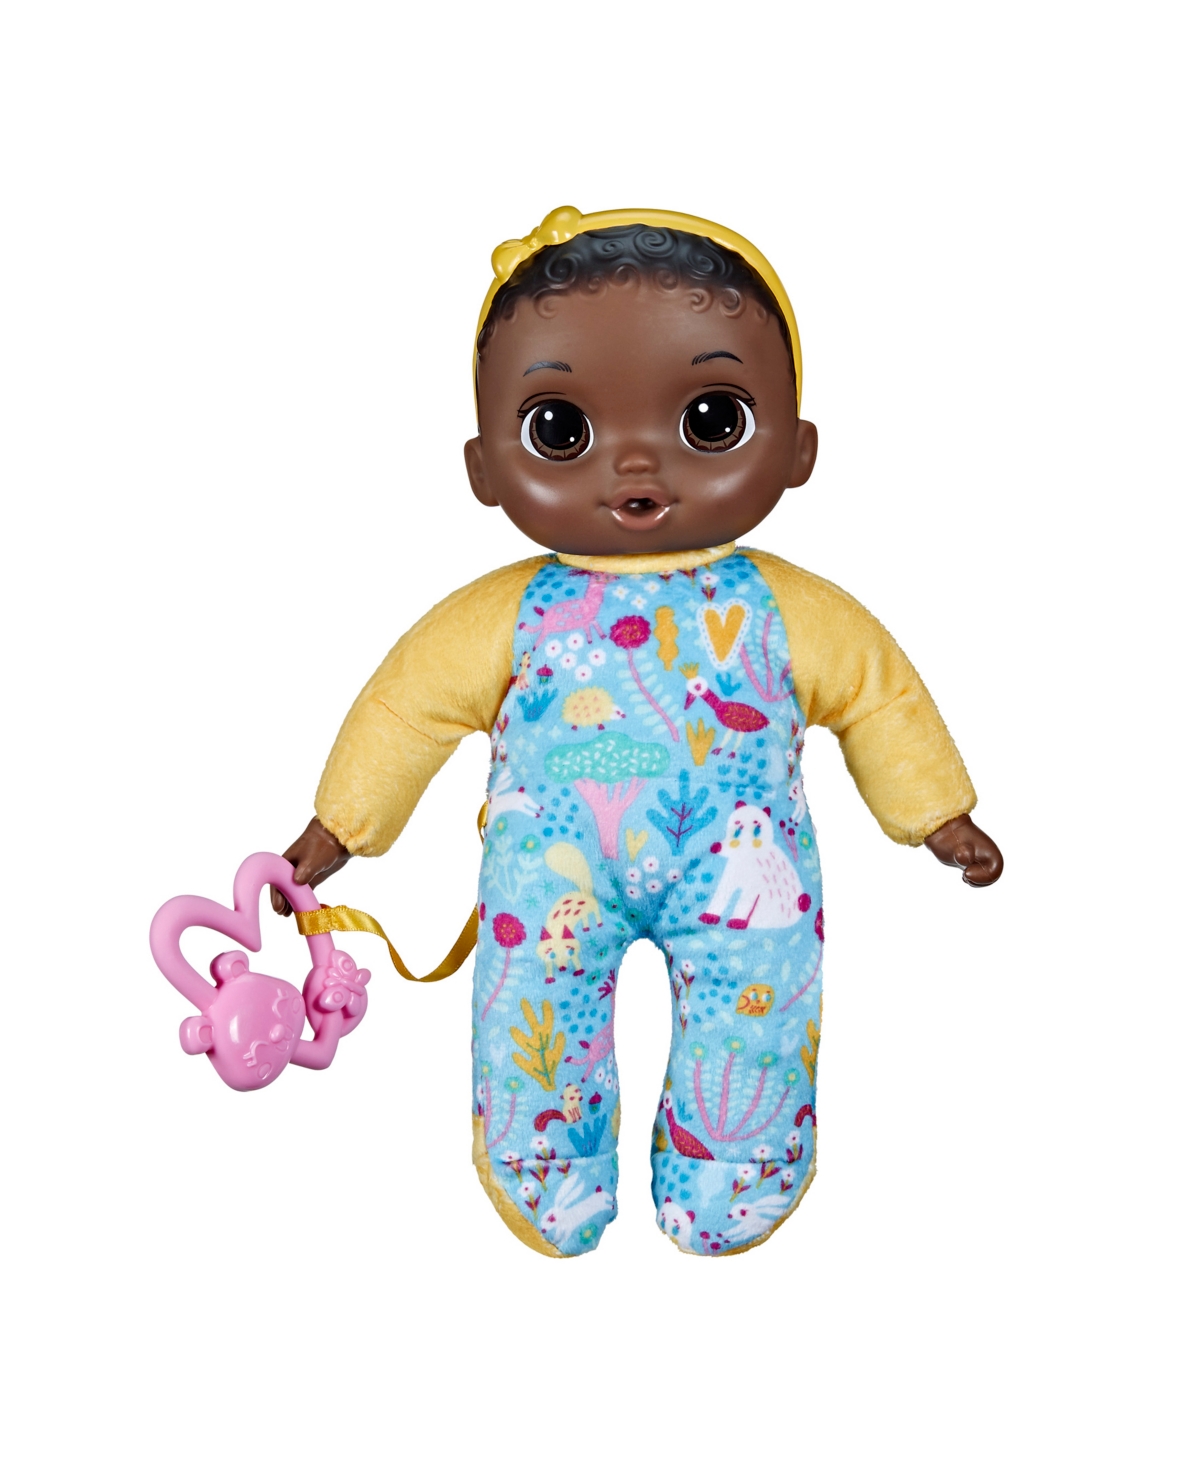 Baby Alive Kids' Soften Cute Doll, Black Hair In No Color